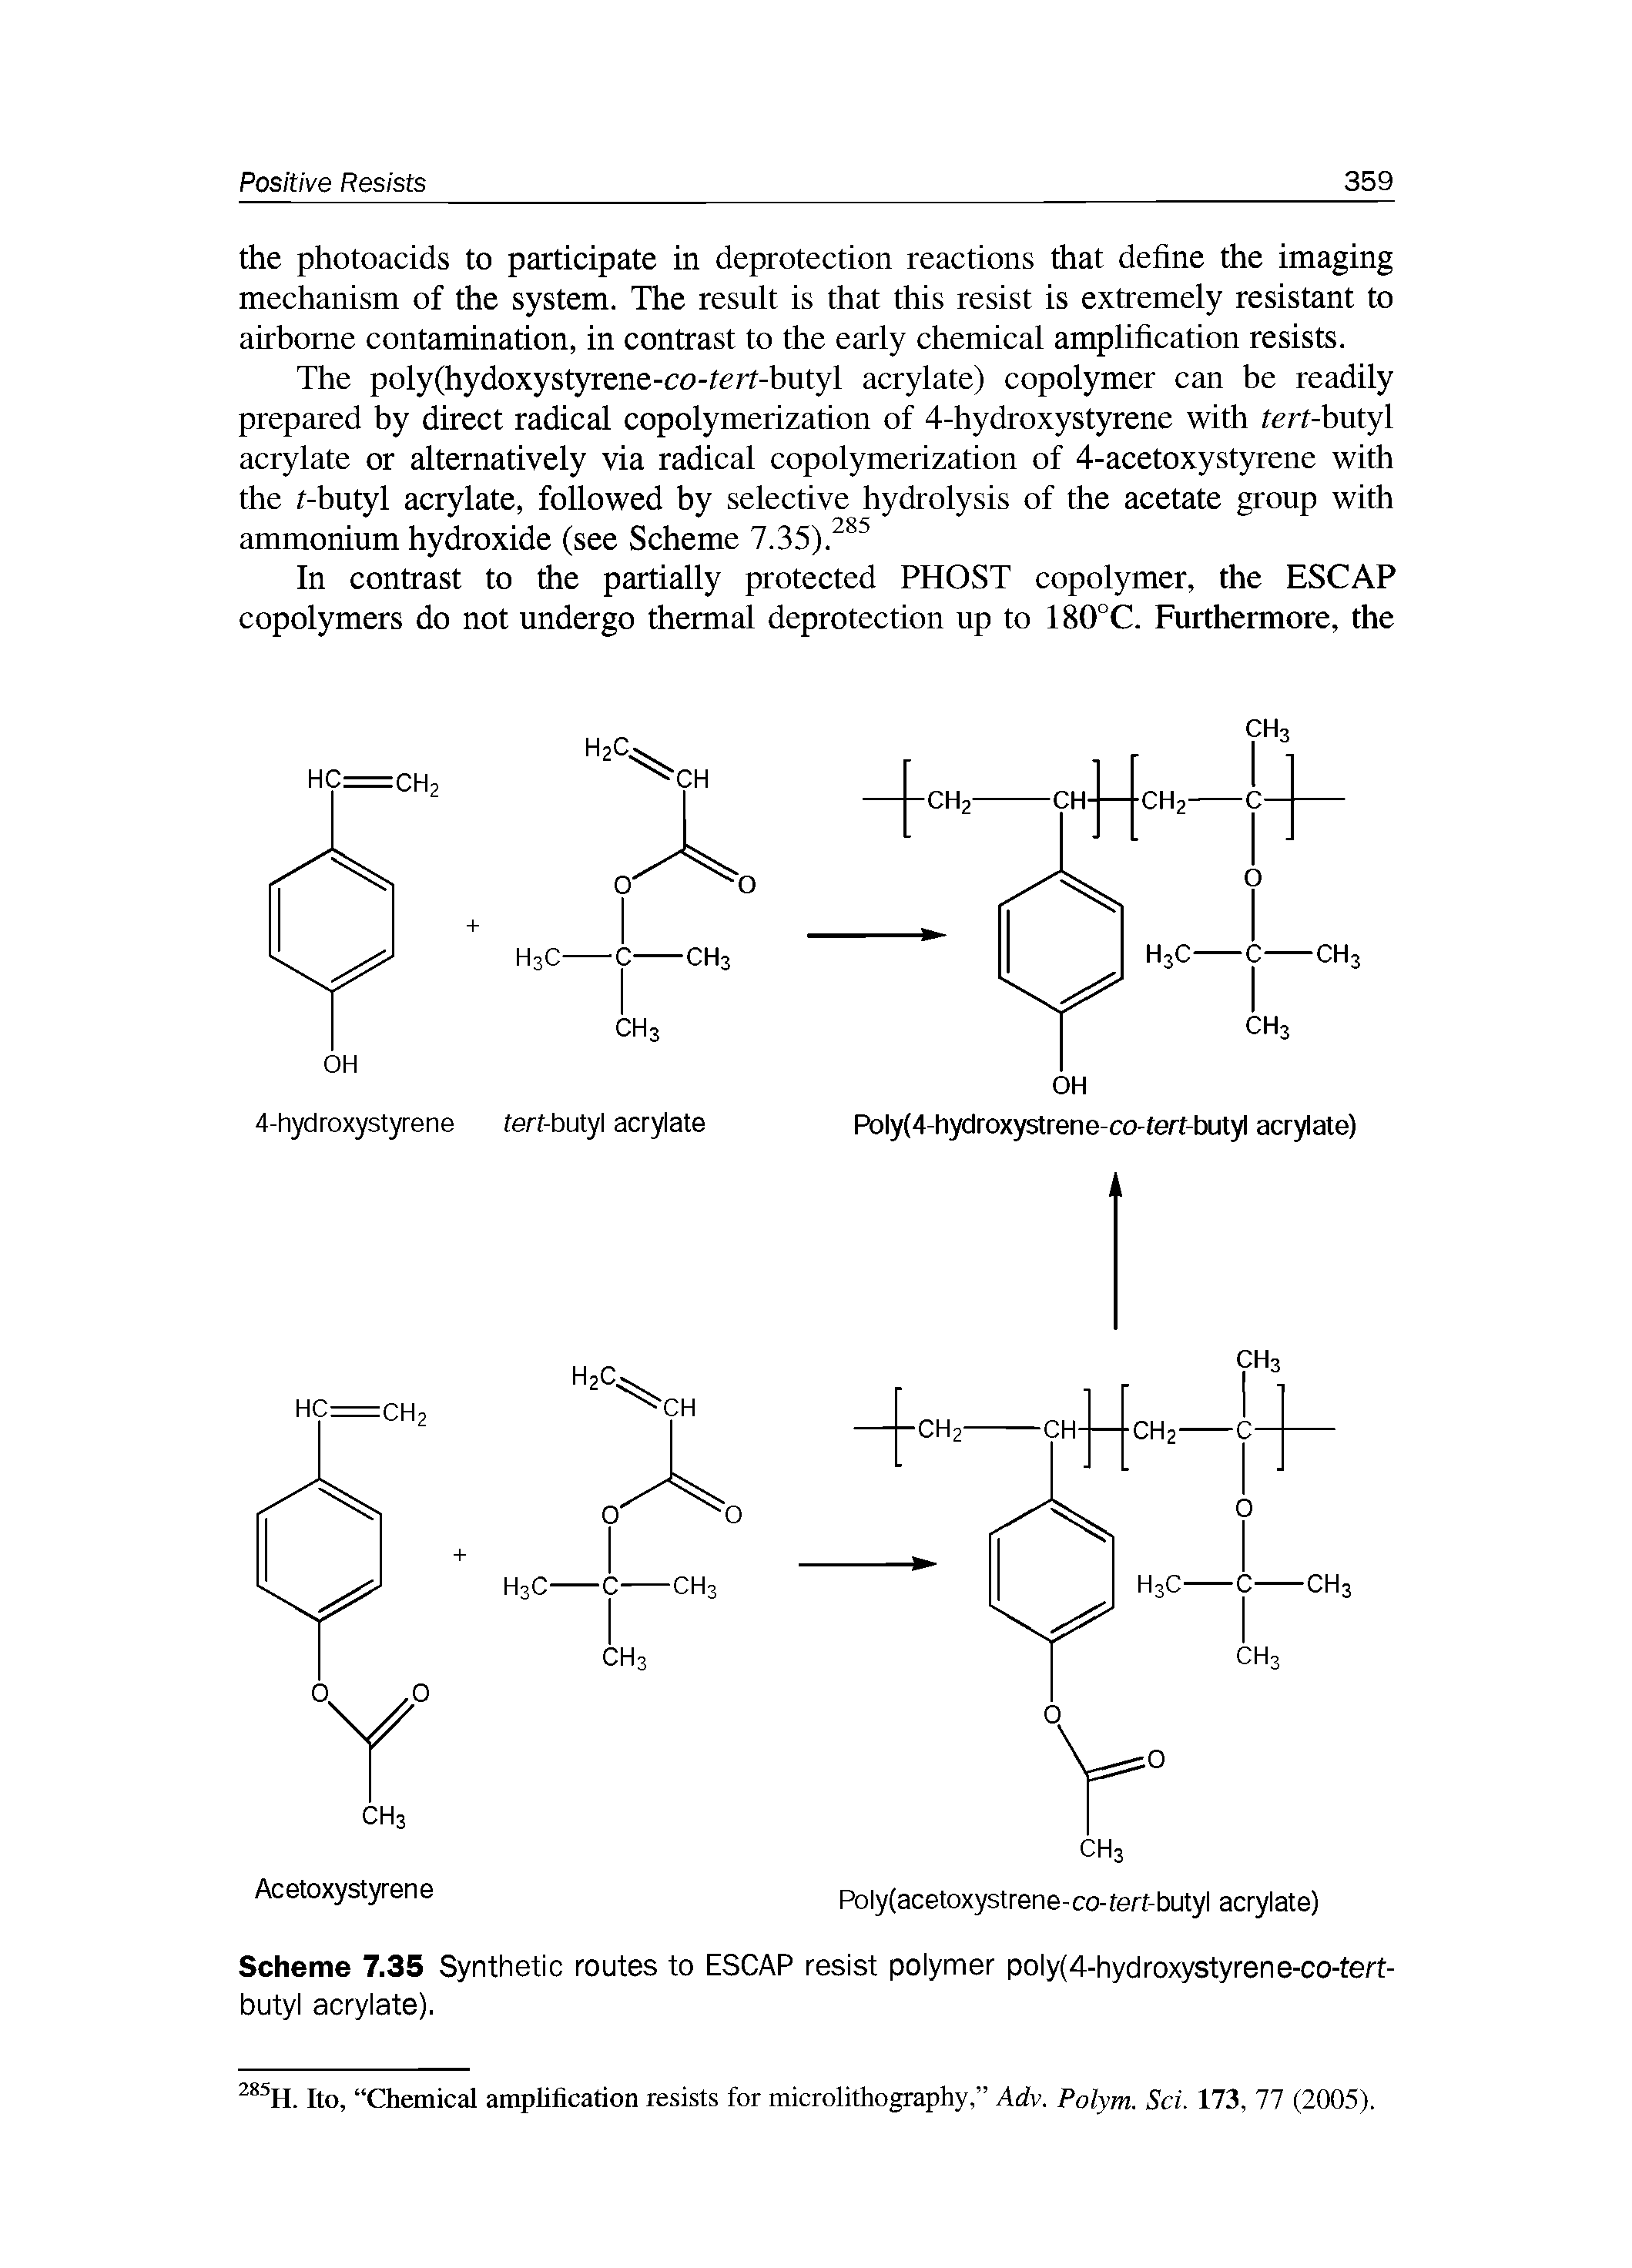 Scheme 7.35 Synthetic routes to ESCAP resist polymer poly(4-hydroxystyrene-co-tert-butyl acrylate).